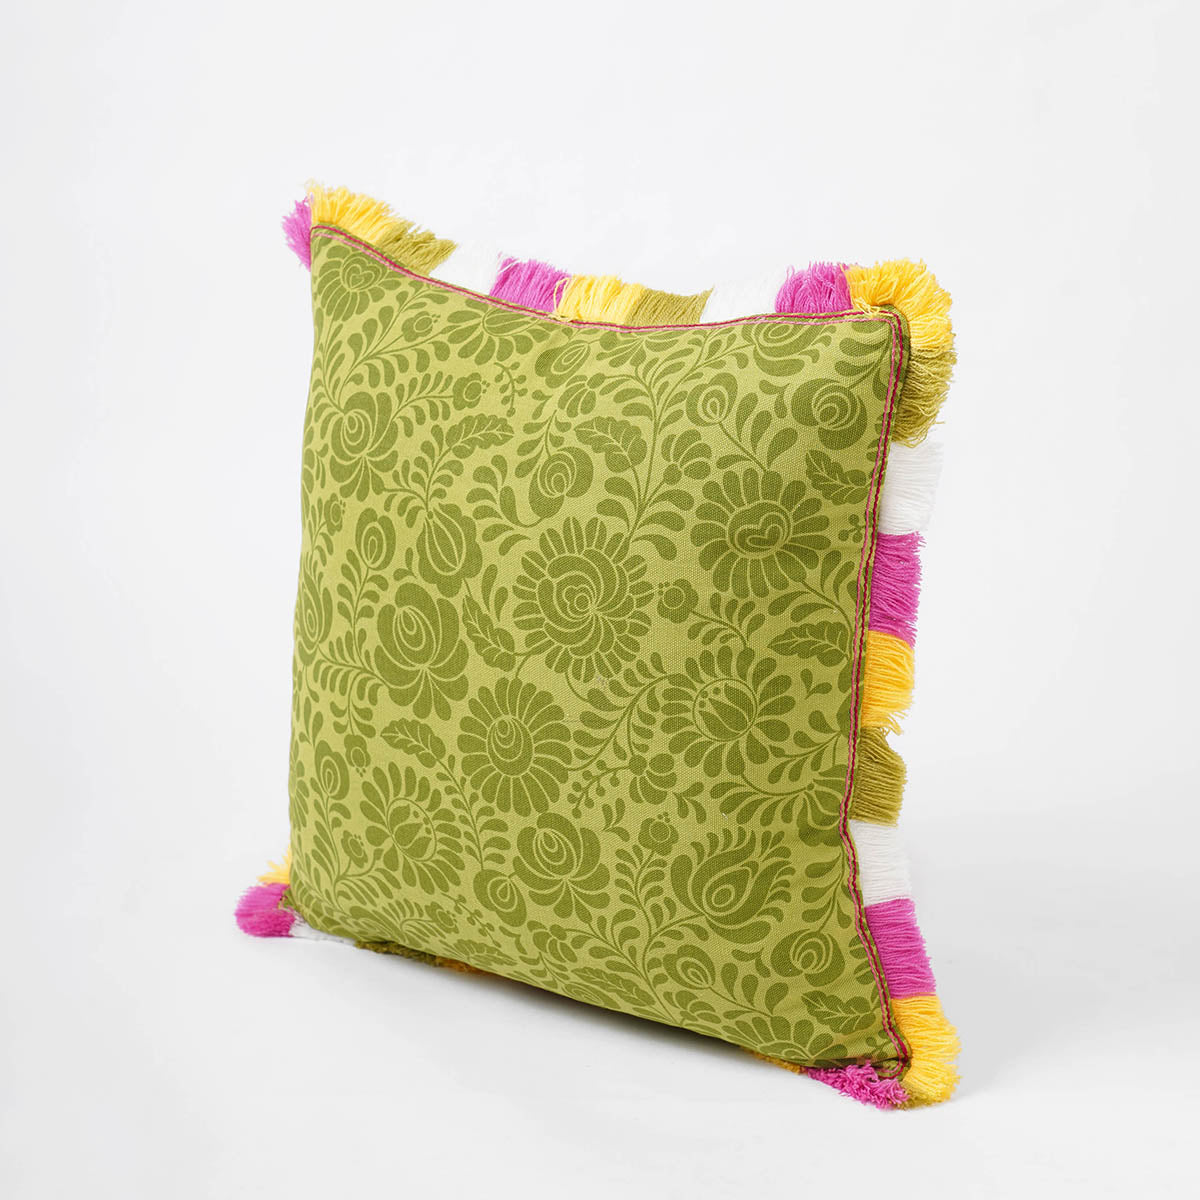 MATYO - Green printed cotton Pillow cover with multicolour acrylic fringe, sizes available